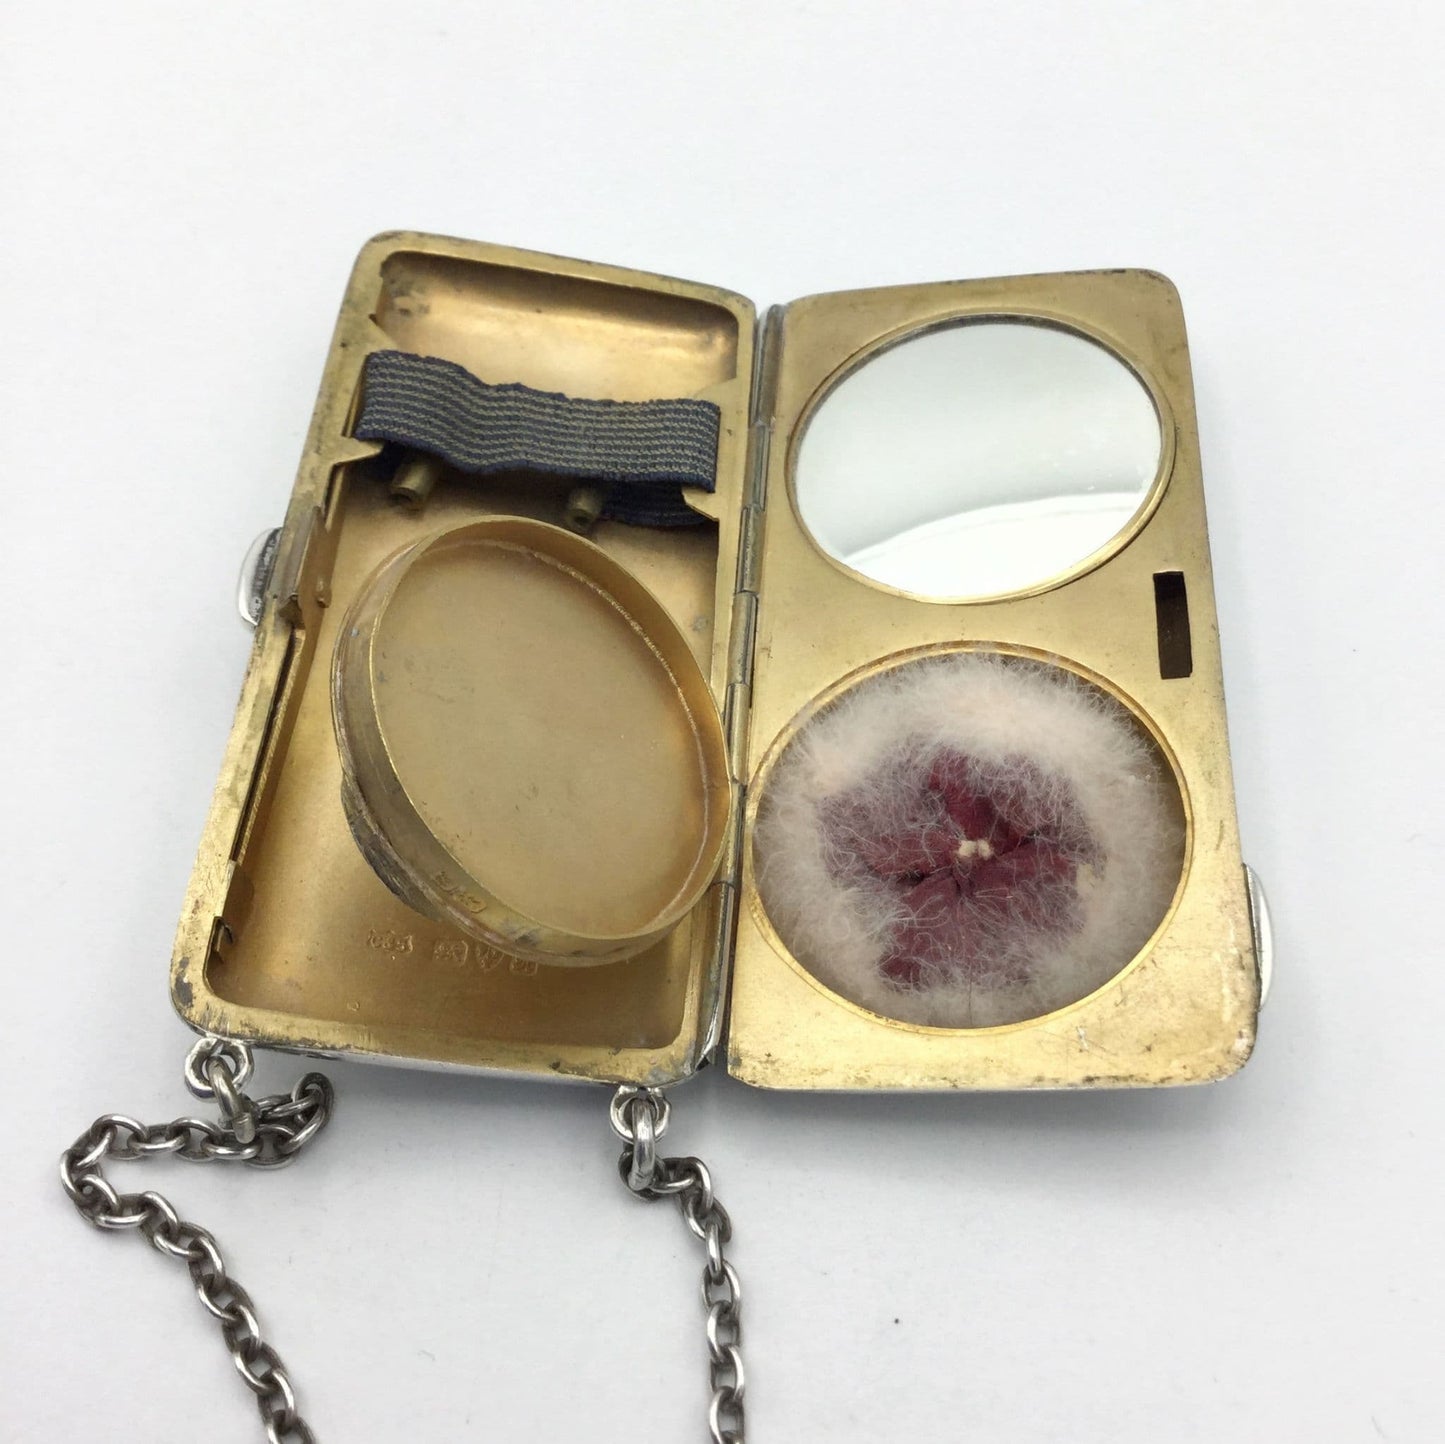 gilded golden inside of case showing a mirror, powder area with an open lid, a powder puff and chain